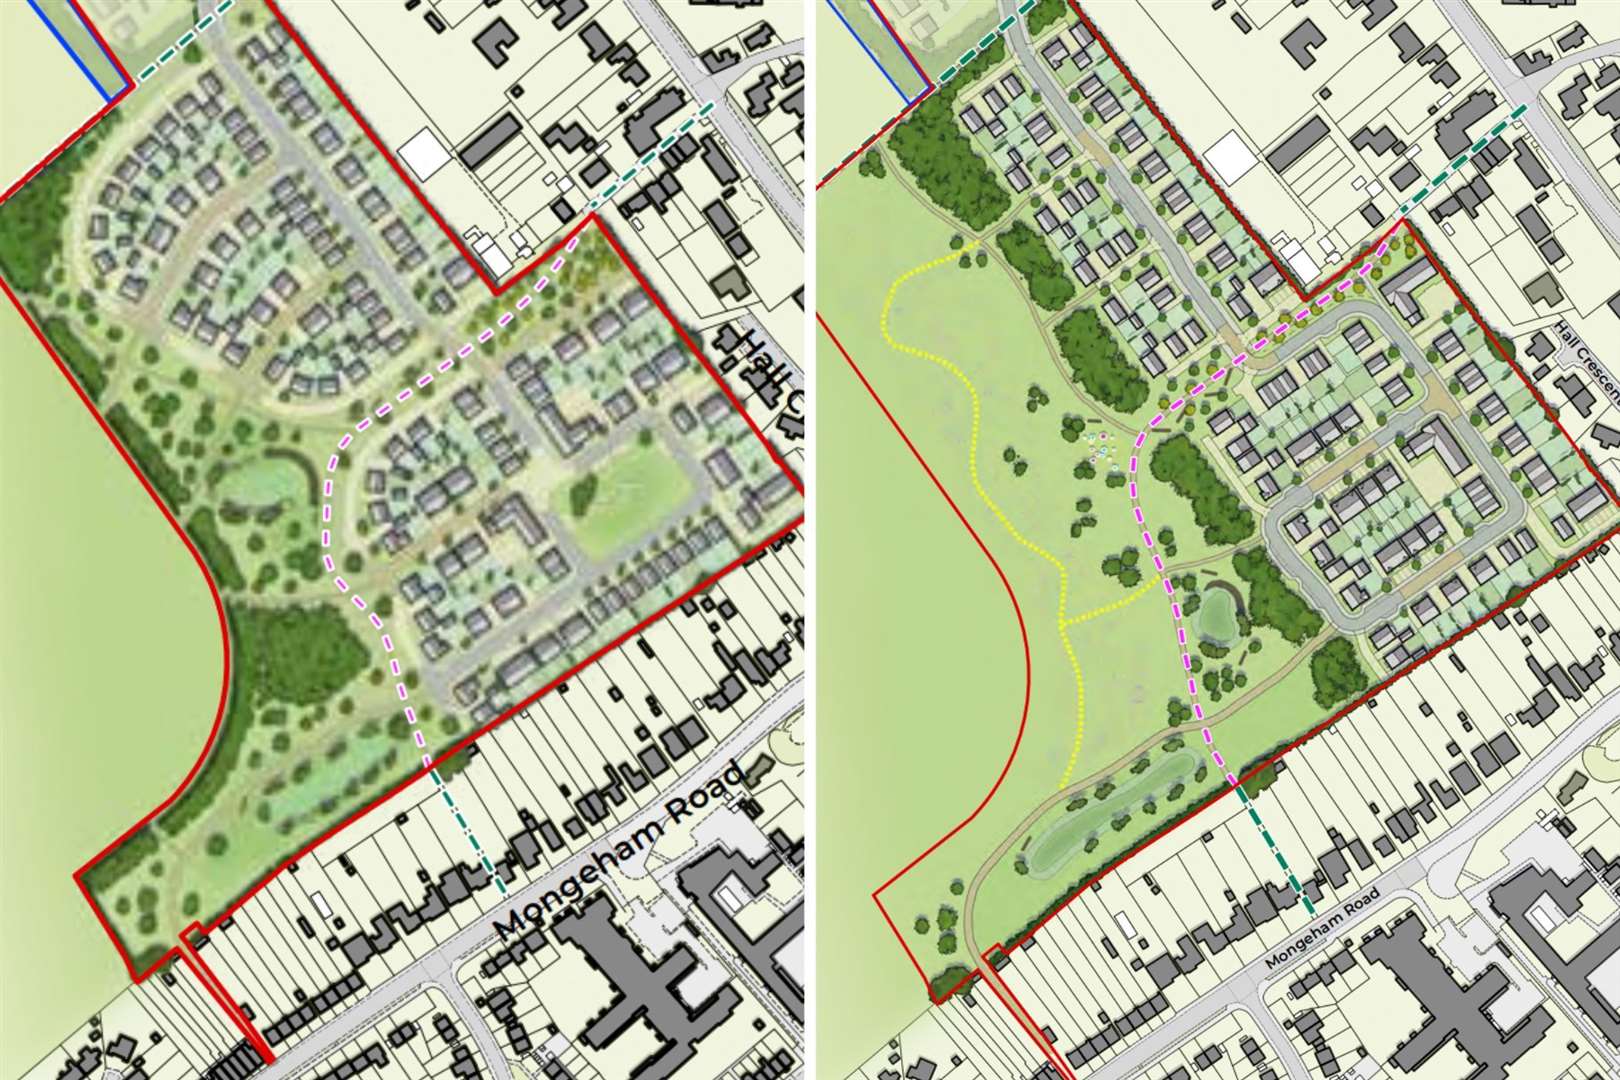 The old, 155-home plans (left) compared with the renewed plans (right). Picture: Richborough Estates